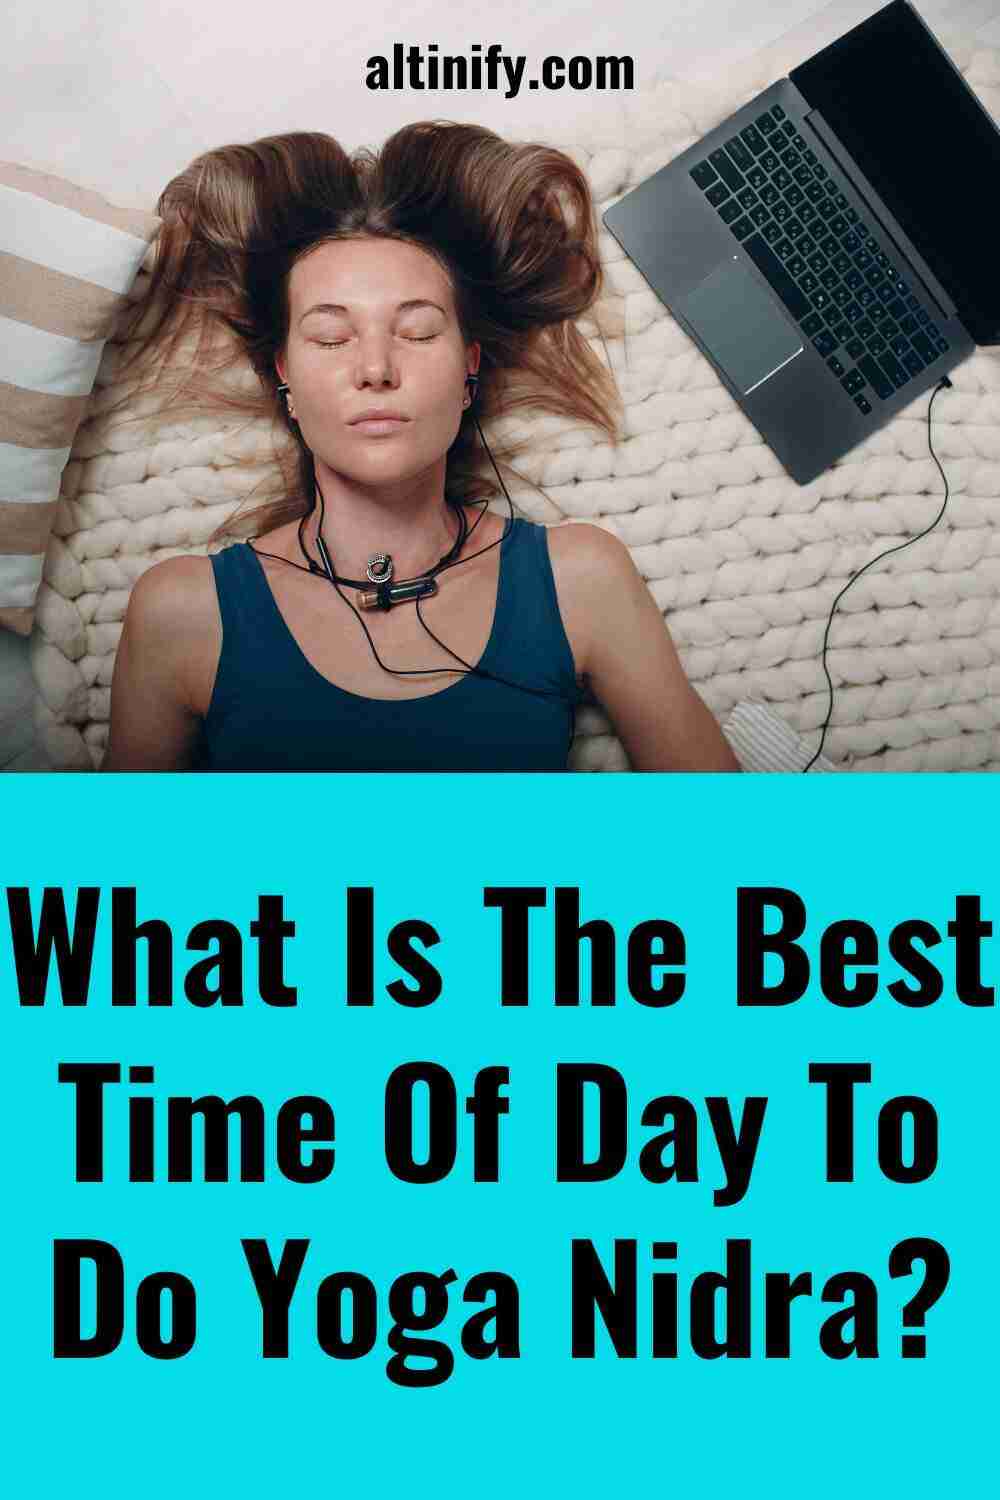 The Best Time Of Day To Do Yoga Nidra